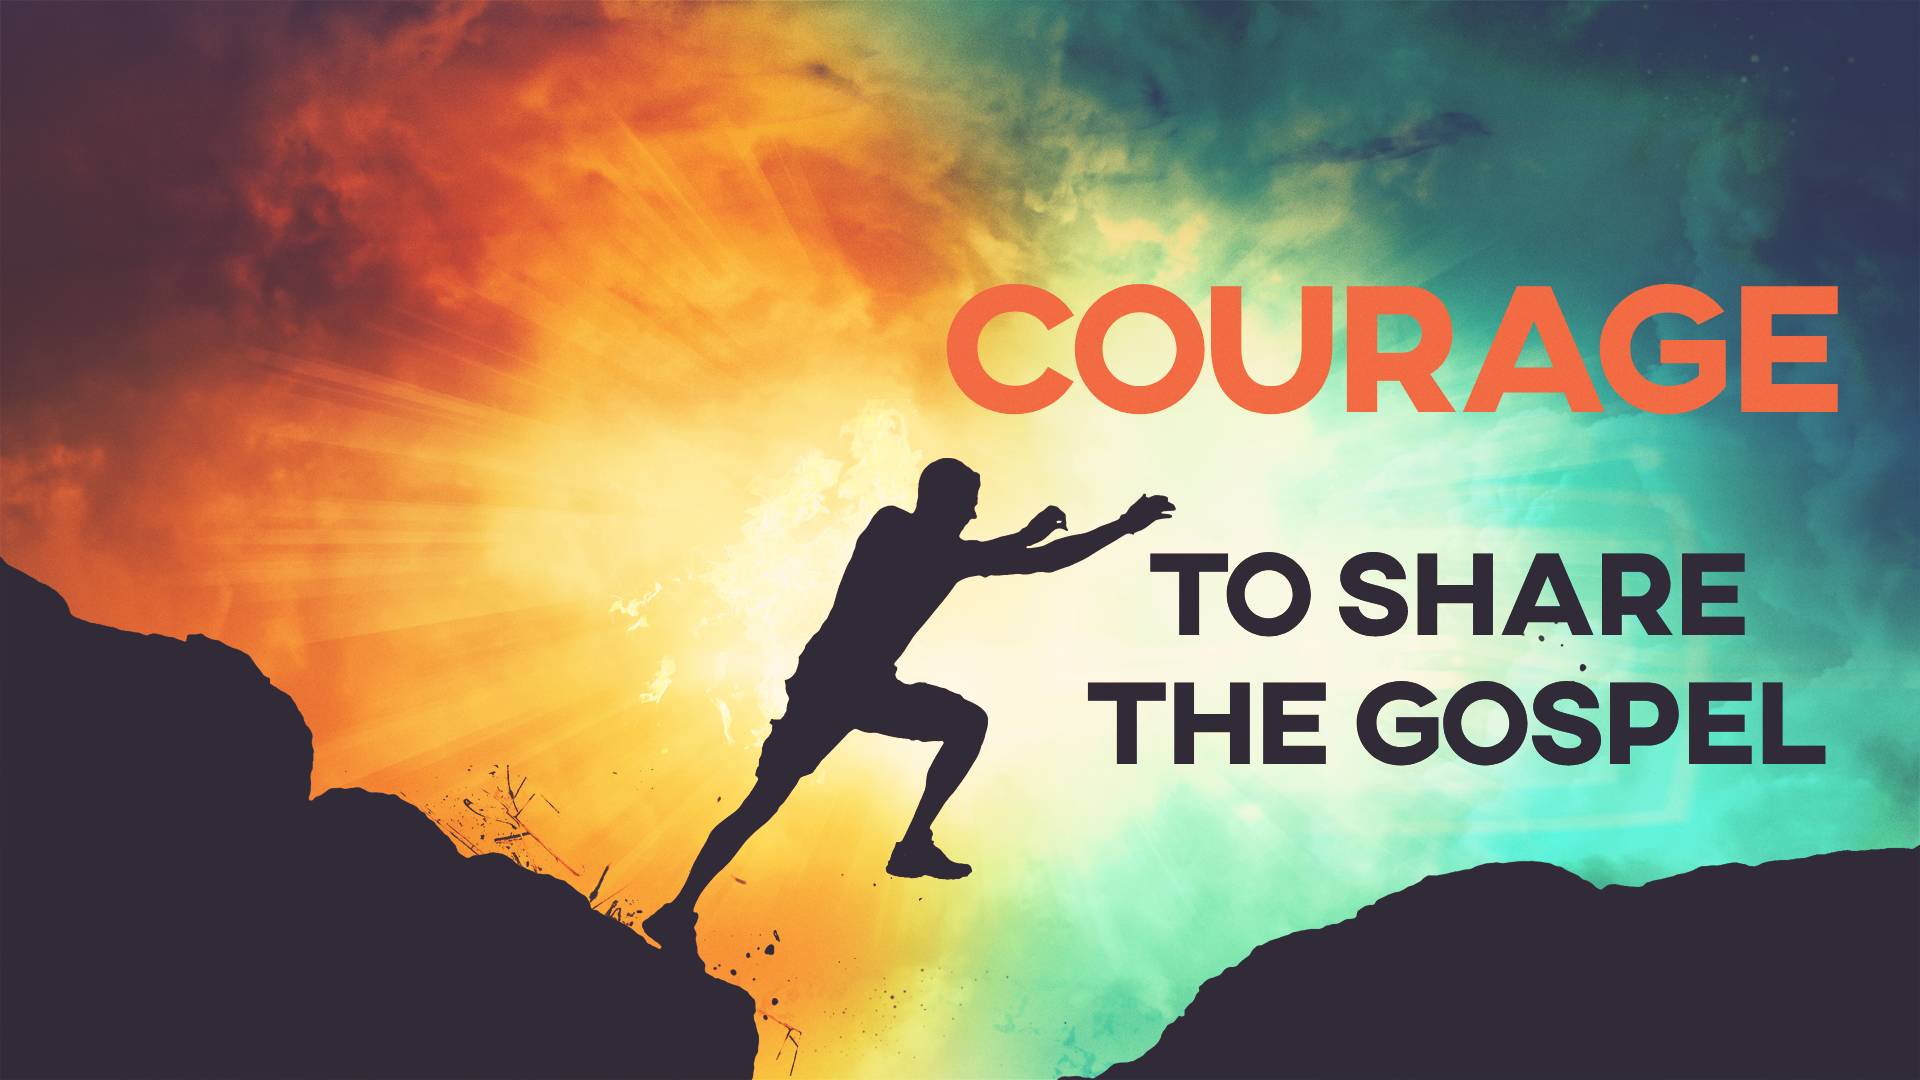 Courage to Share the Gospel